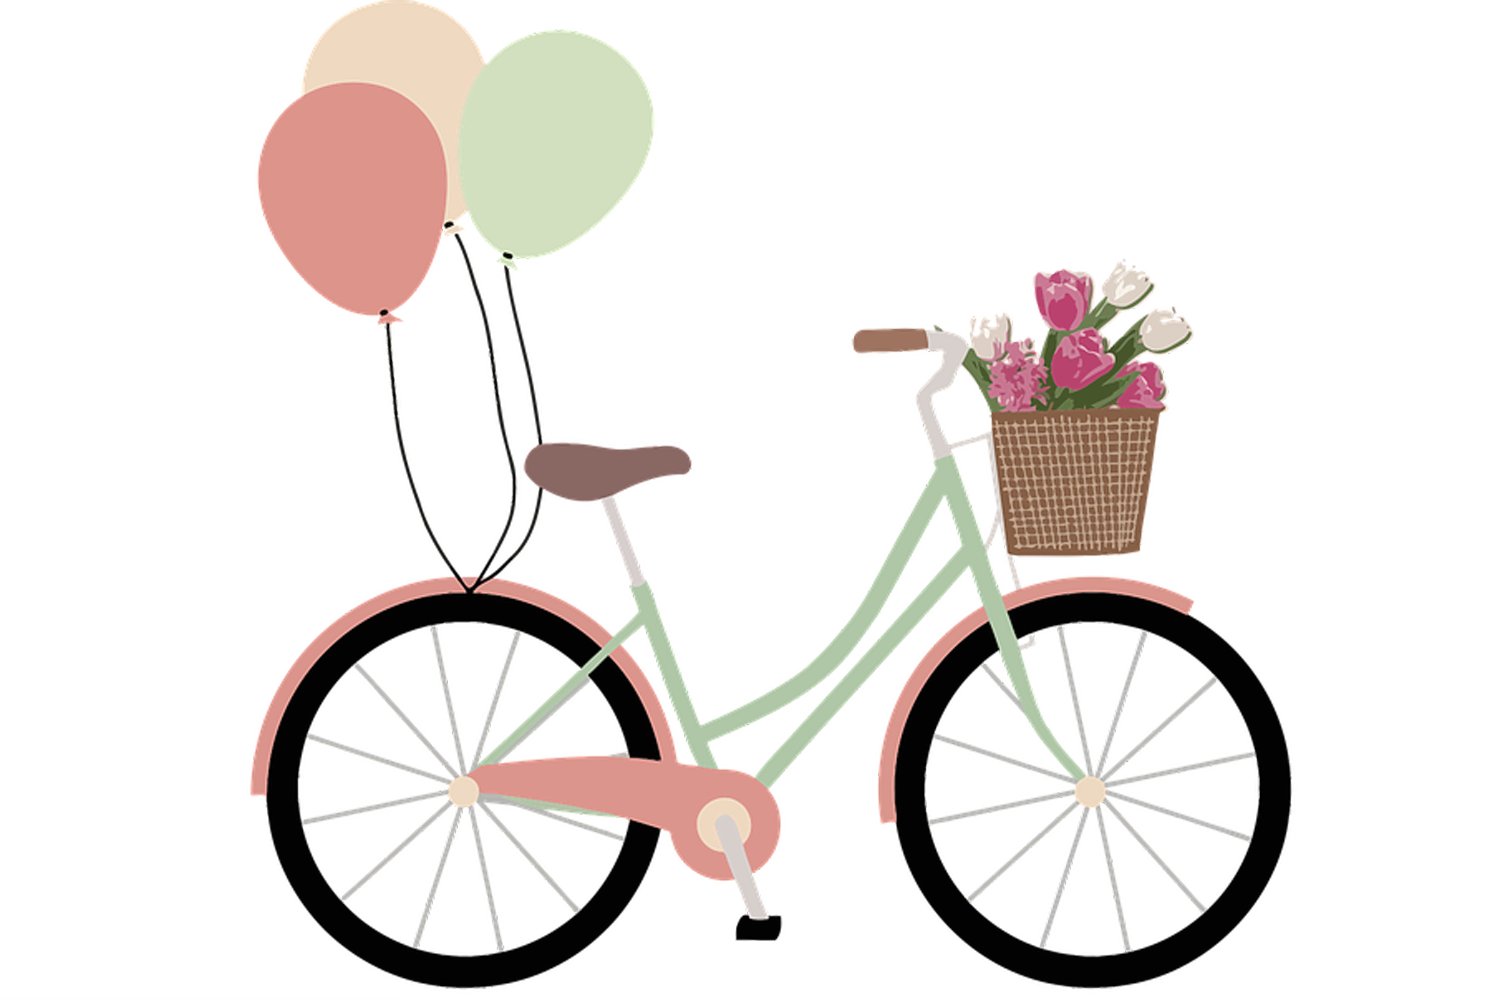 Funny Bikes - Wishing You Both A Lifetime Of Happiness Together (1500x1000)